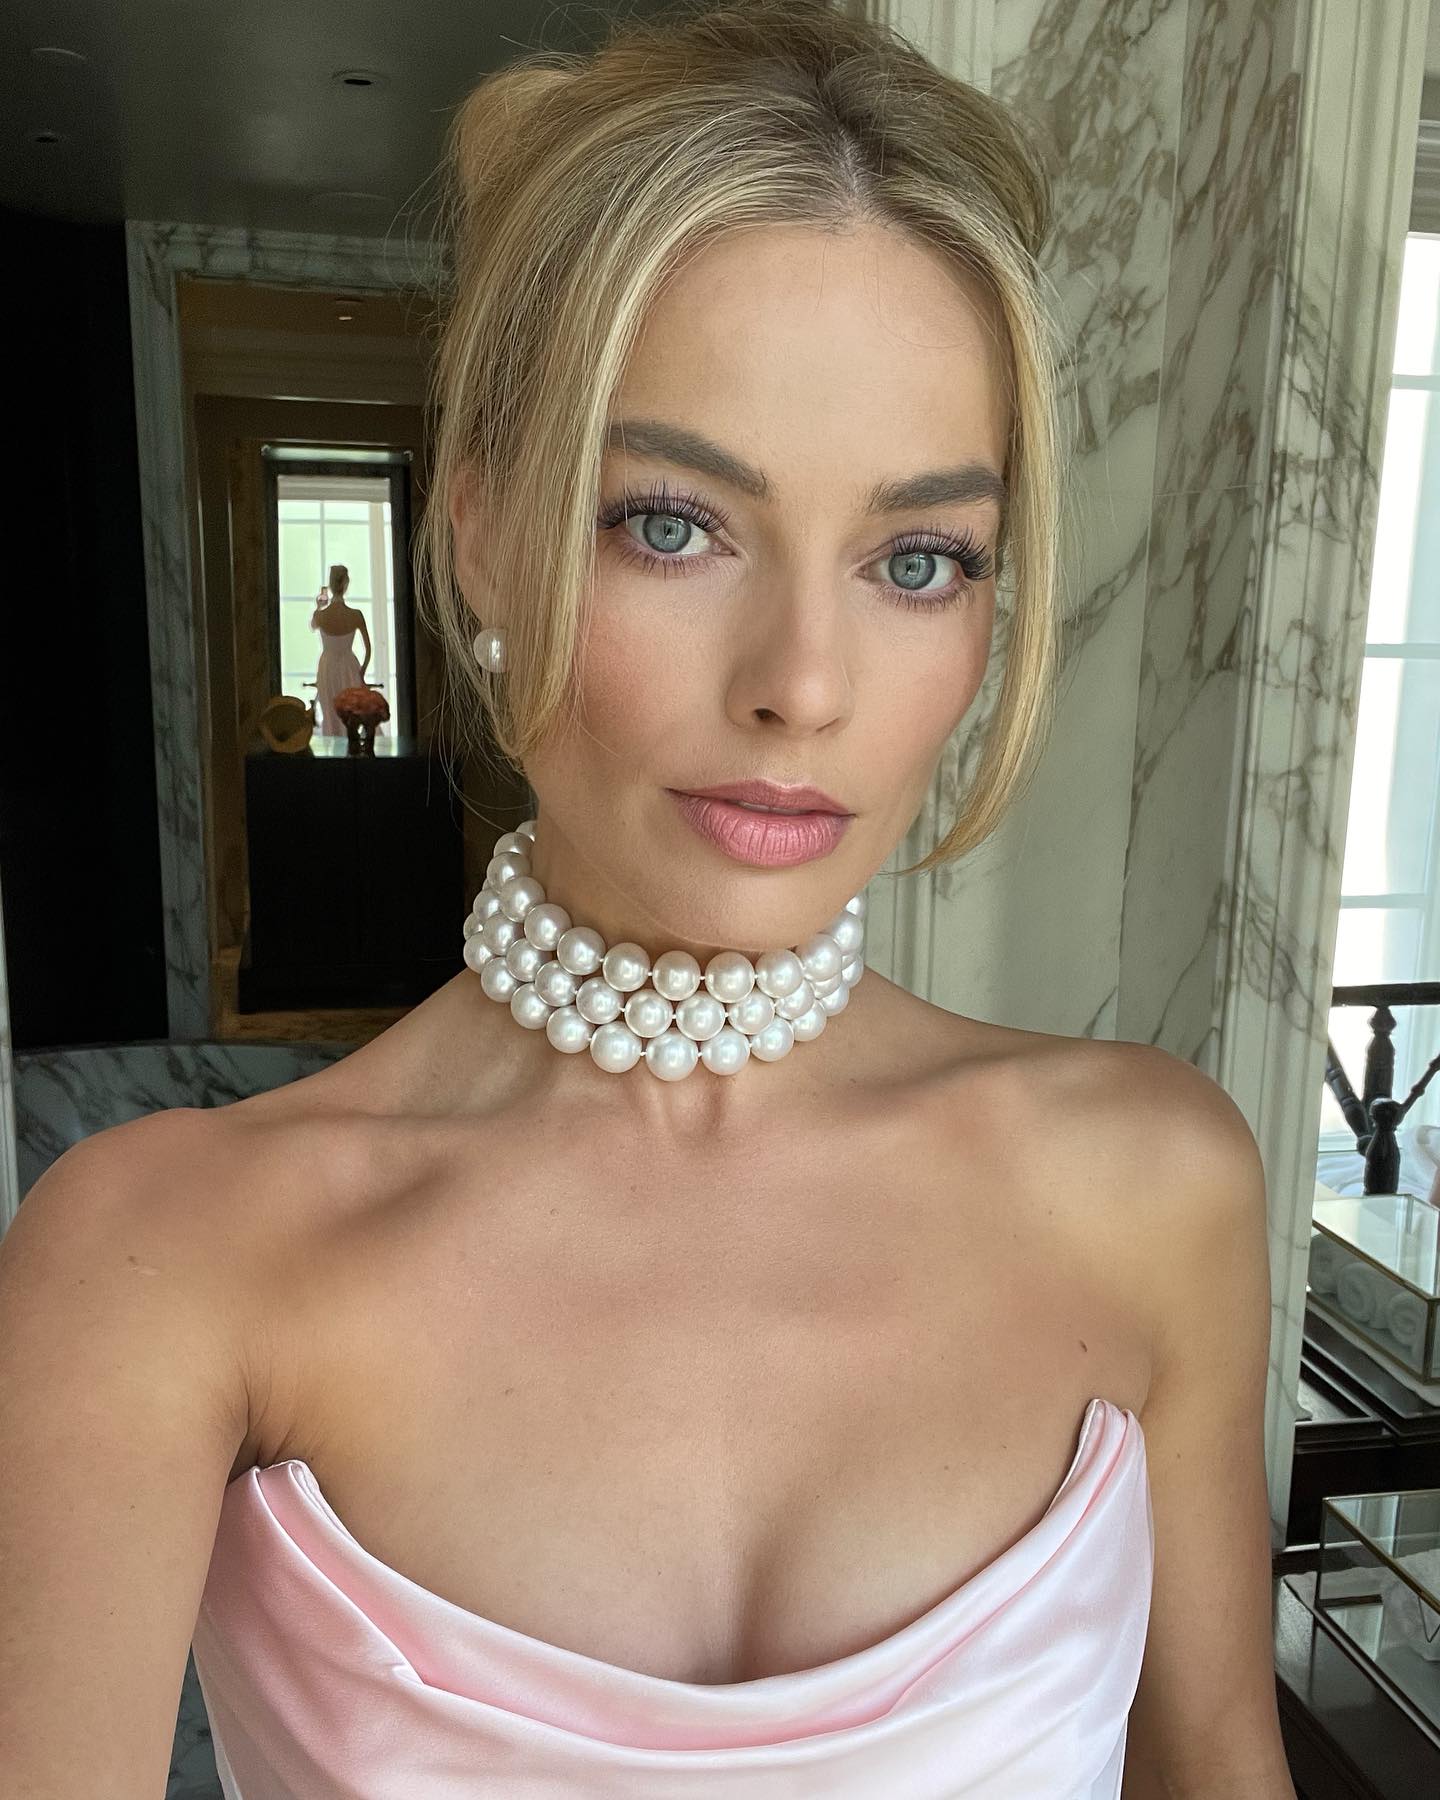 Margot Robbie's Stylist Has Shared Unseen Looks From 'Barbie' Tour